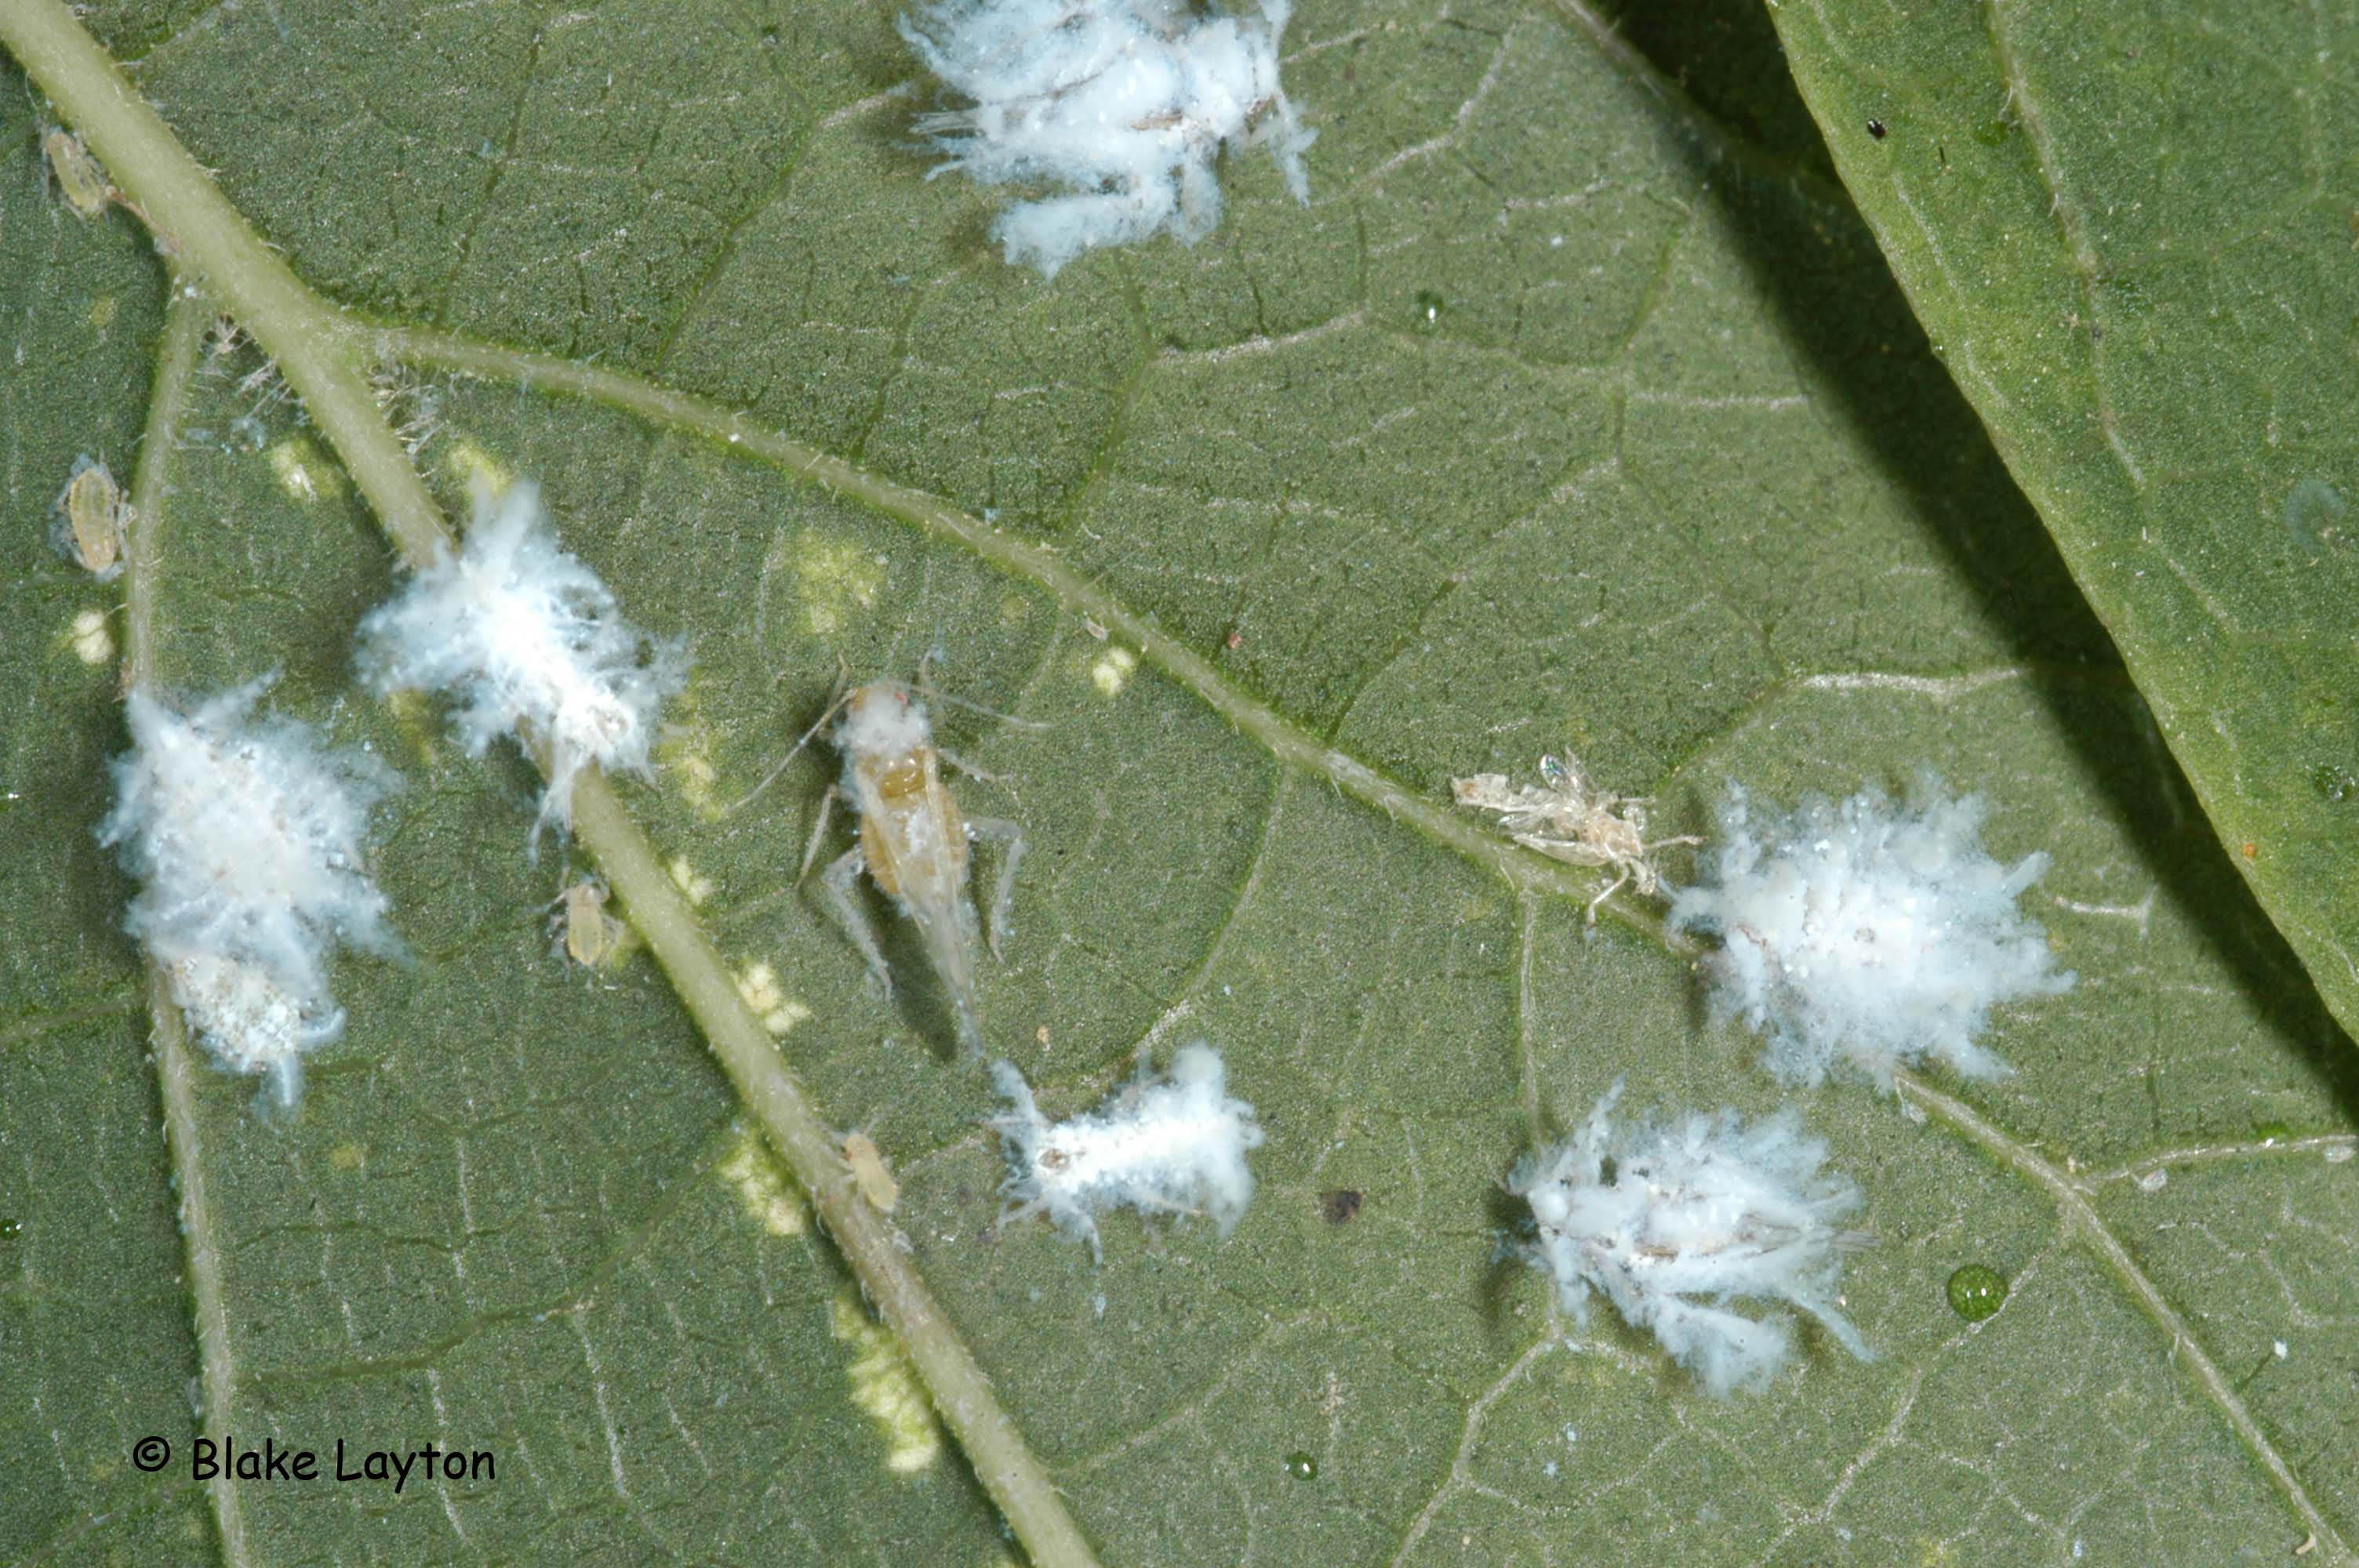 wooly aphids